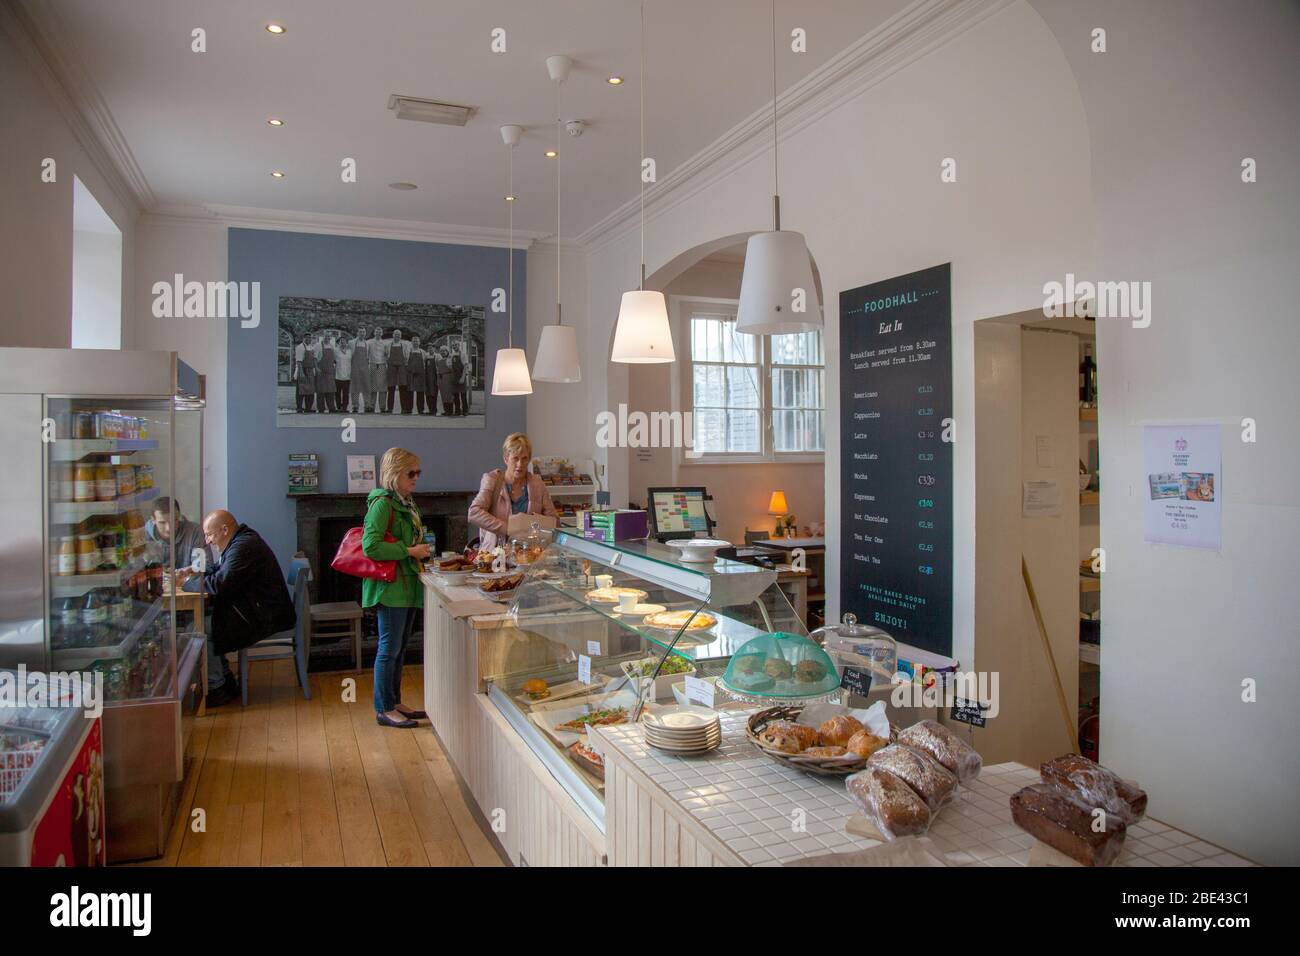 Food Hall, Kilkenny Design Centre, Kilkenny, Ireland.  People not identified.  Editorial use only. Stock Photo